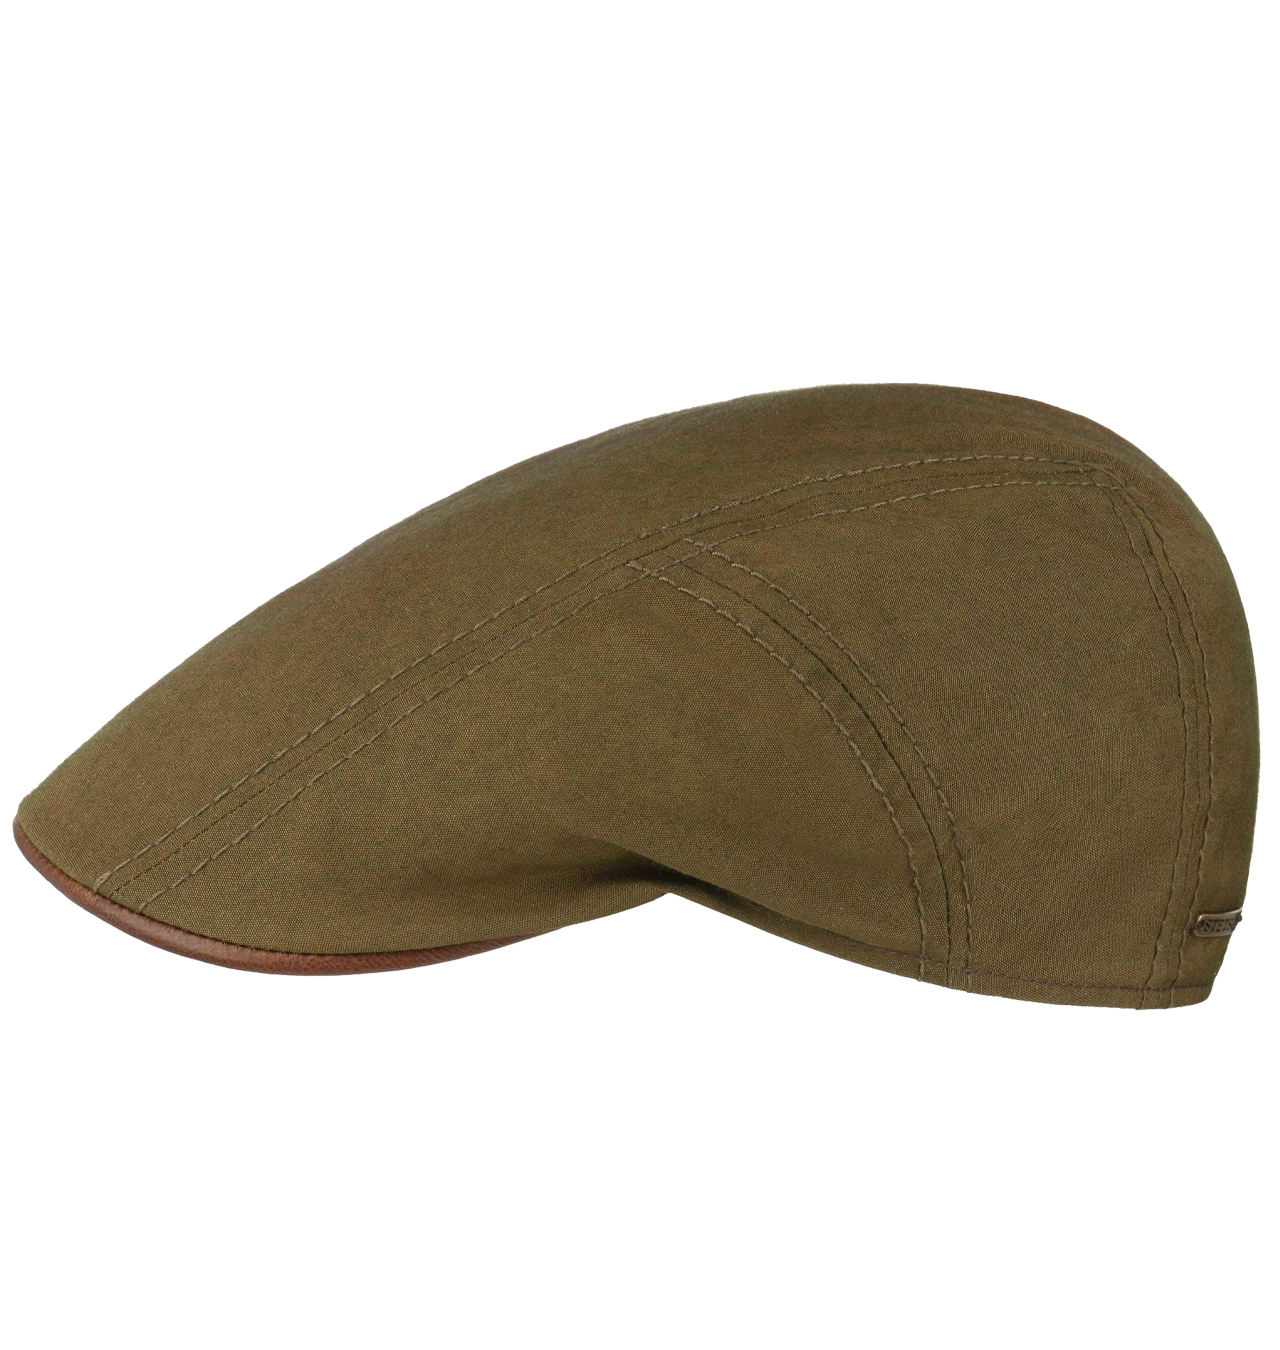 Stetson---Waxed-Cotton-Flat-Cap---Olive1